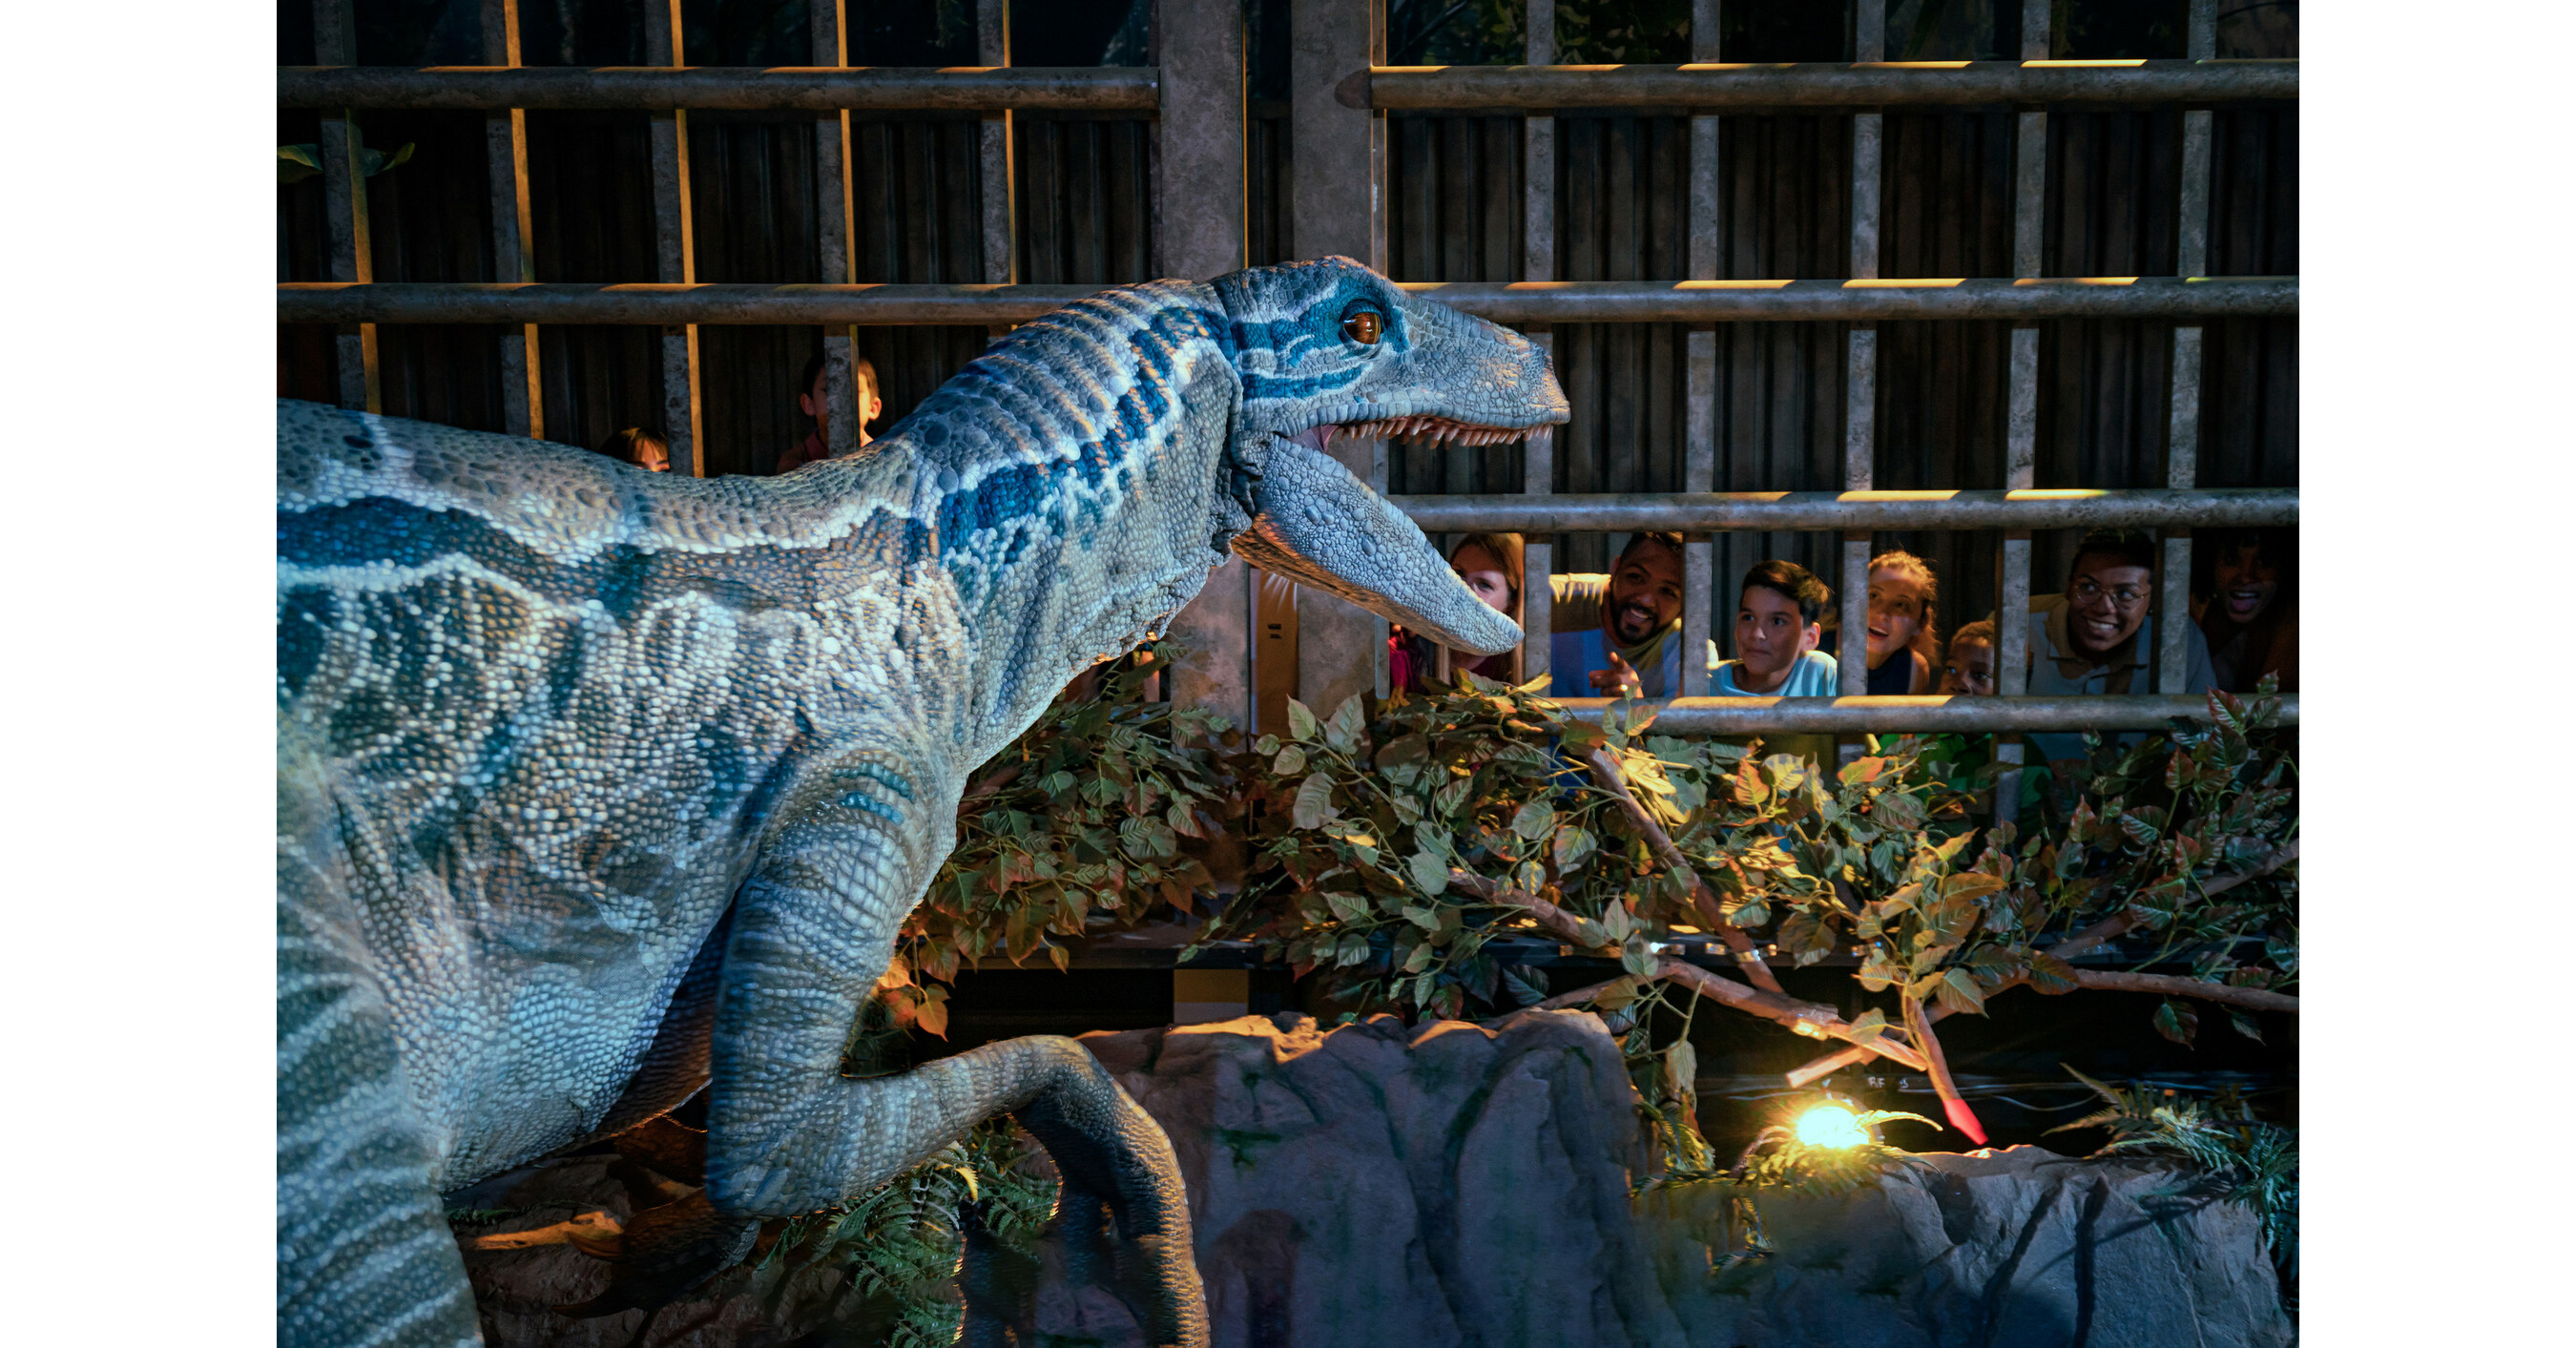 The Jurassic World Exhibition roars into Mississauga